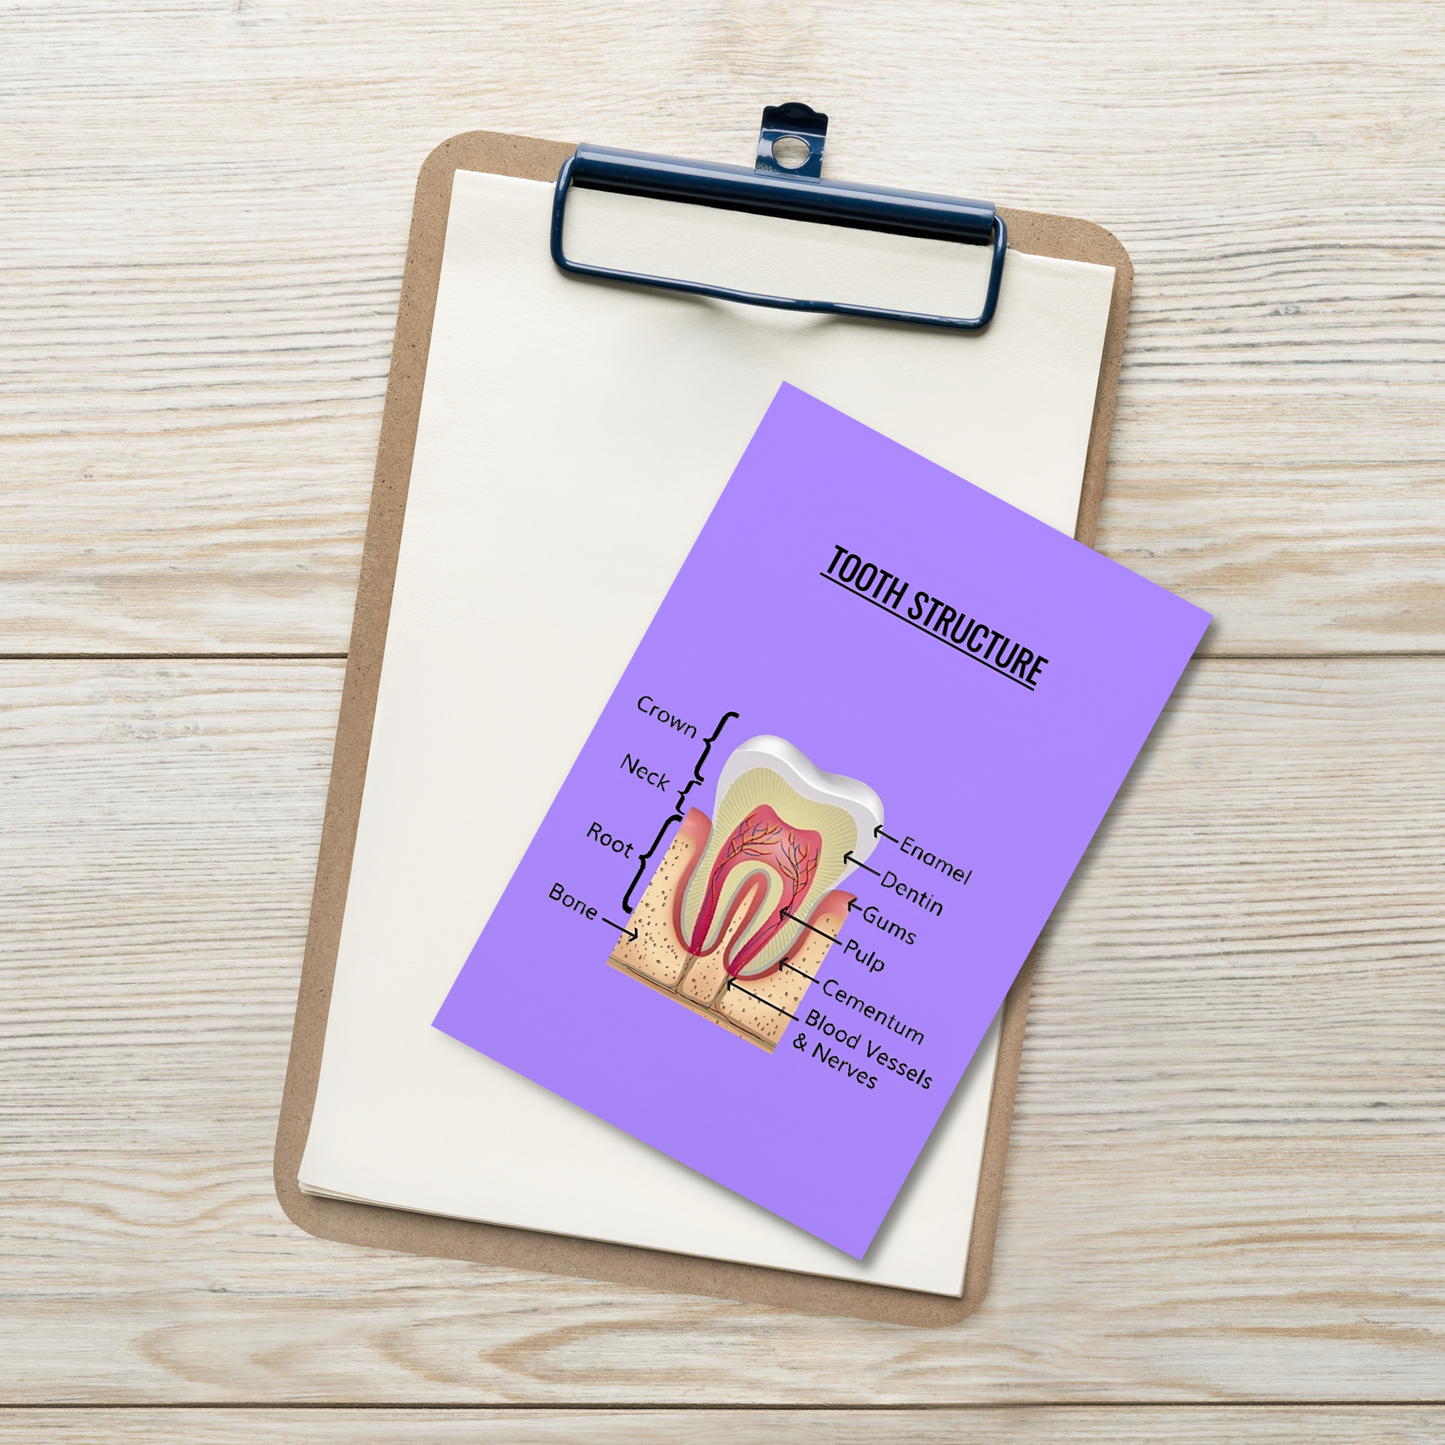 Oral Hygiene Cards- Tooth Structure